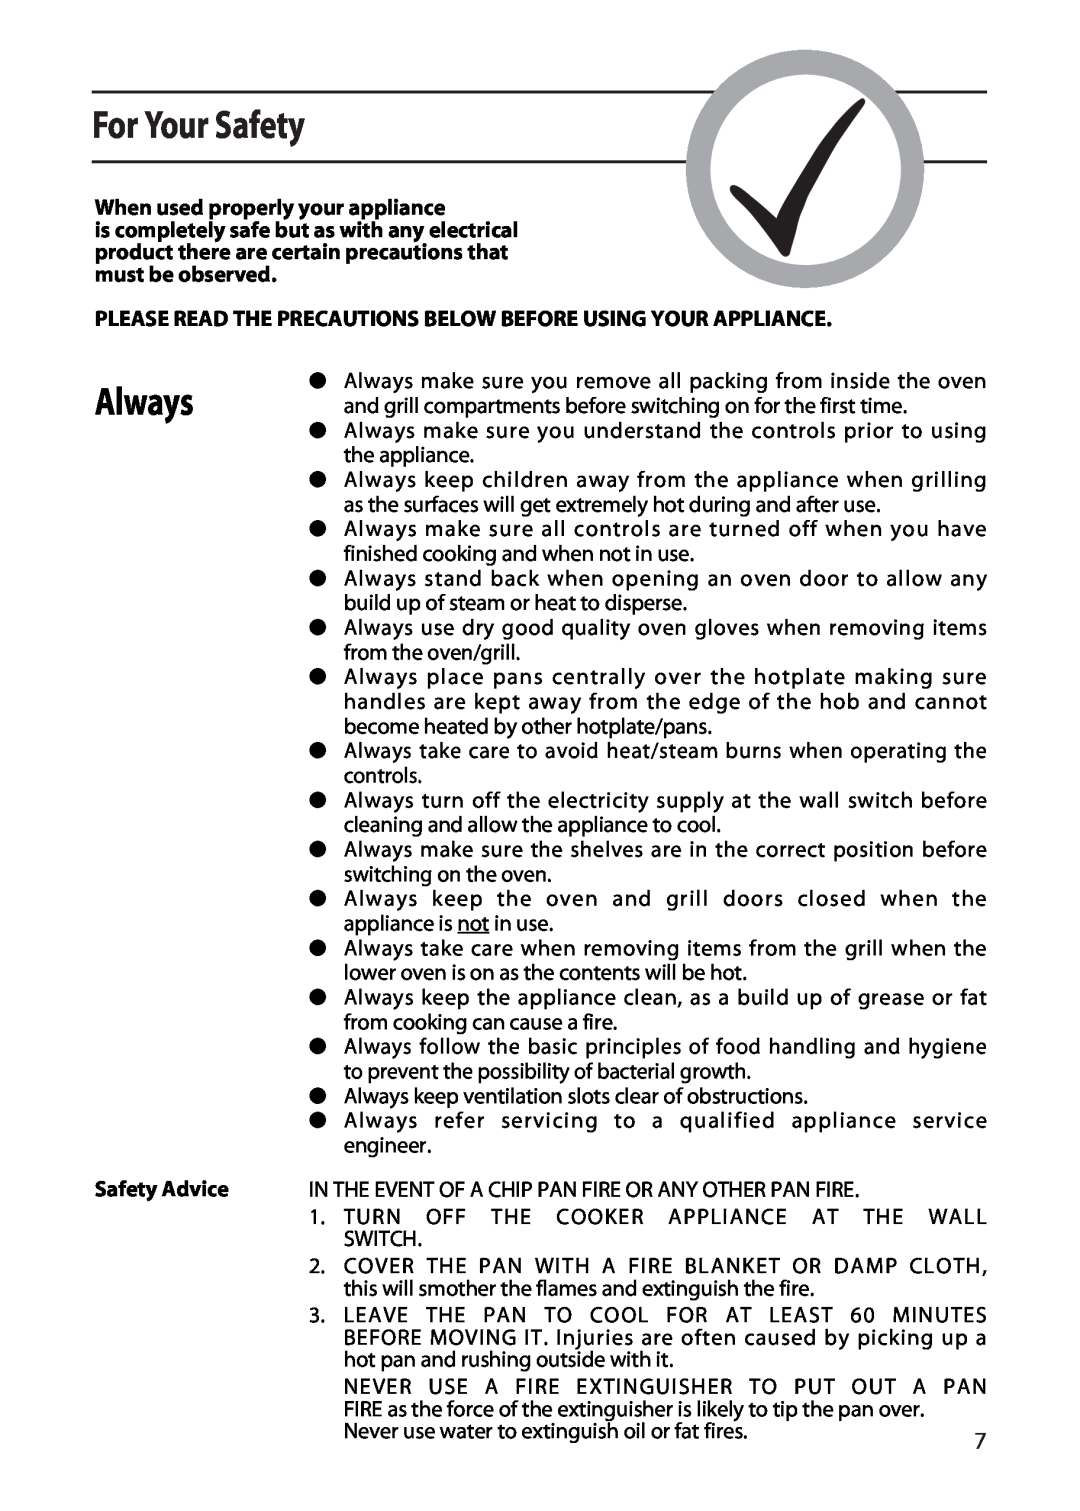 Creda X252E manual For Your Safety, Always, When used properly your appliance, Safety Advice 